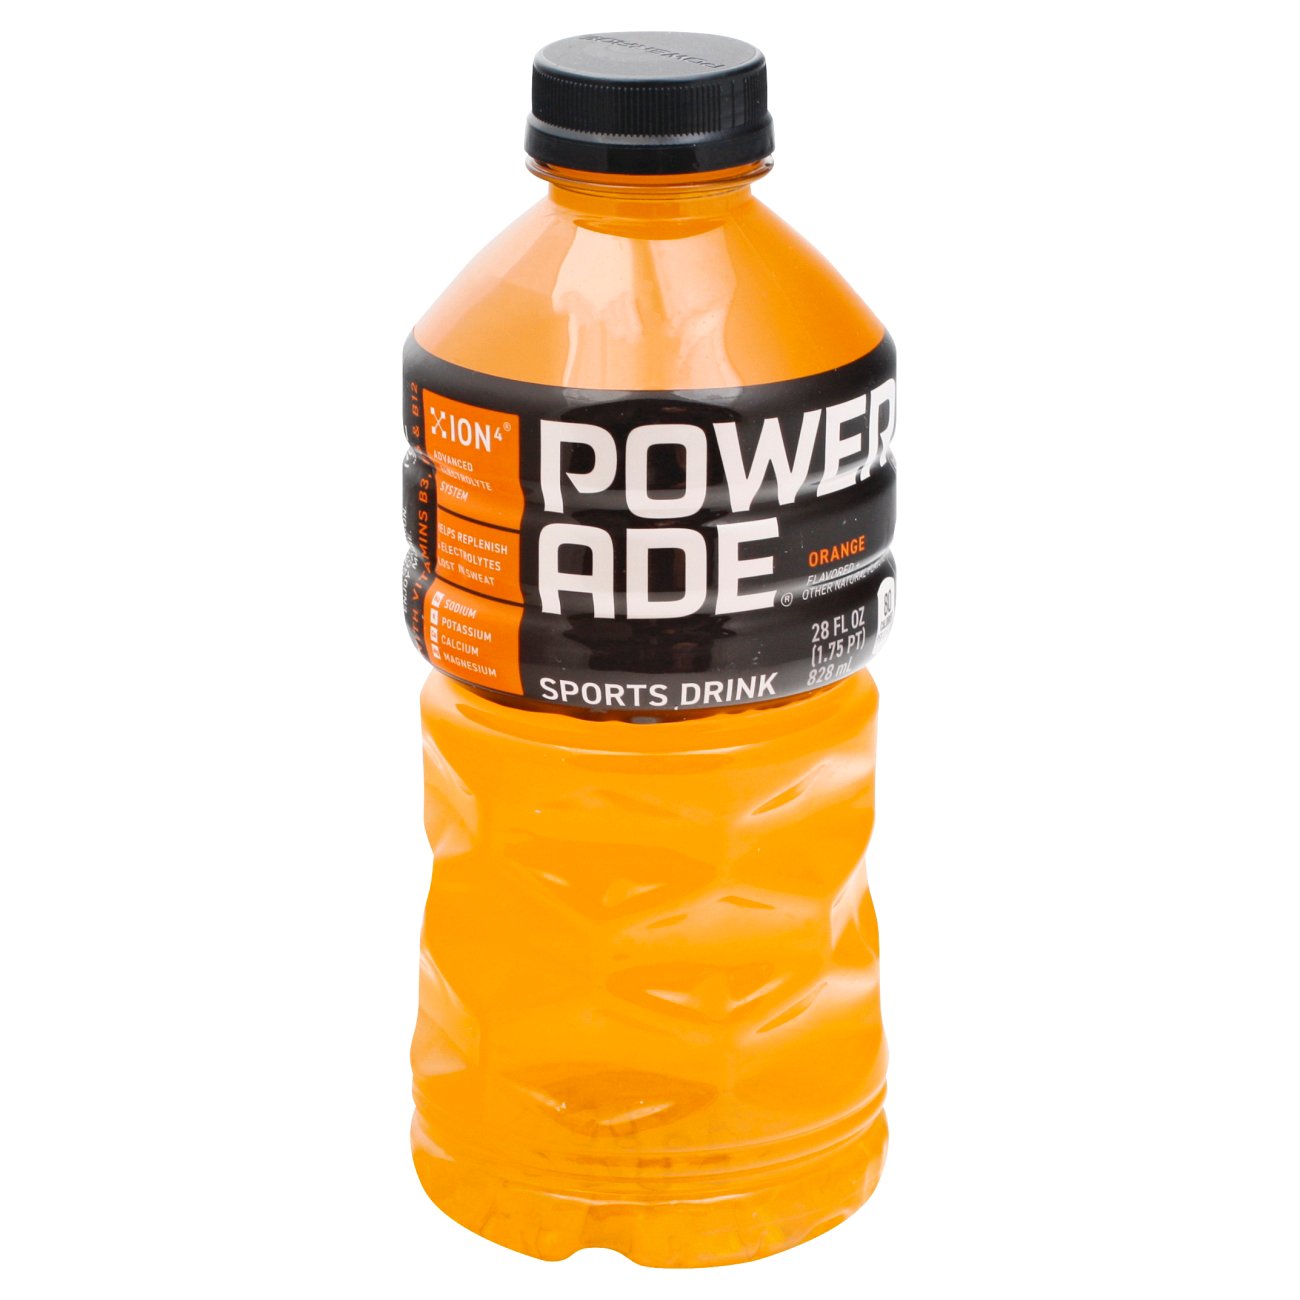 Powerade Ion 4 Nutrition Facts - Nutrition Ftempo